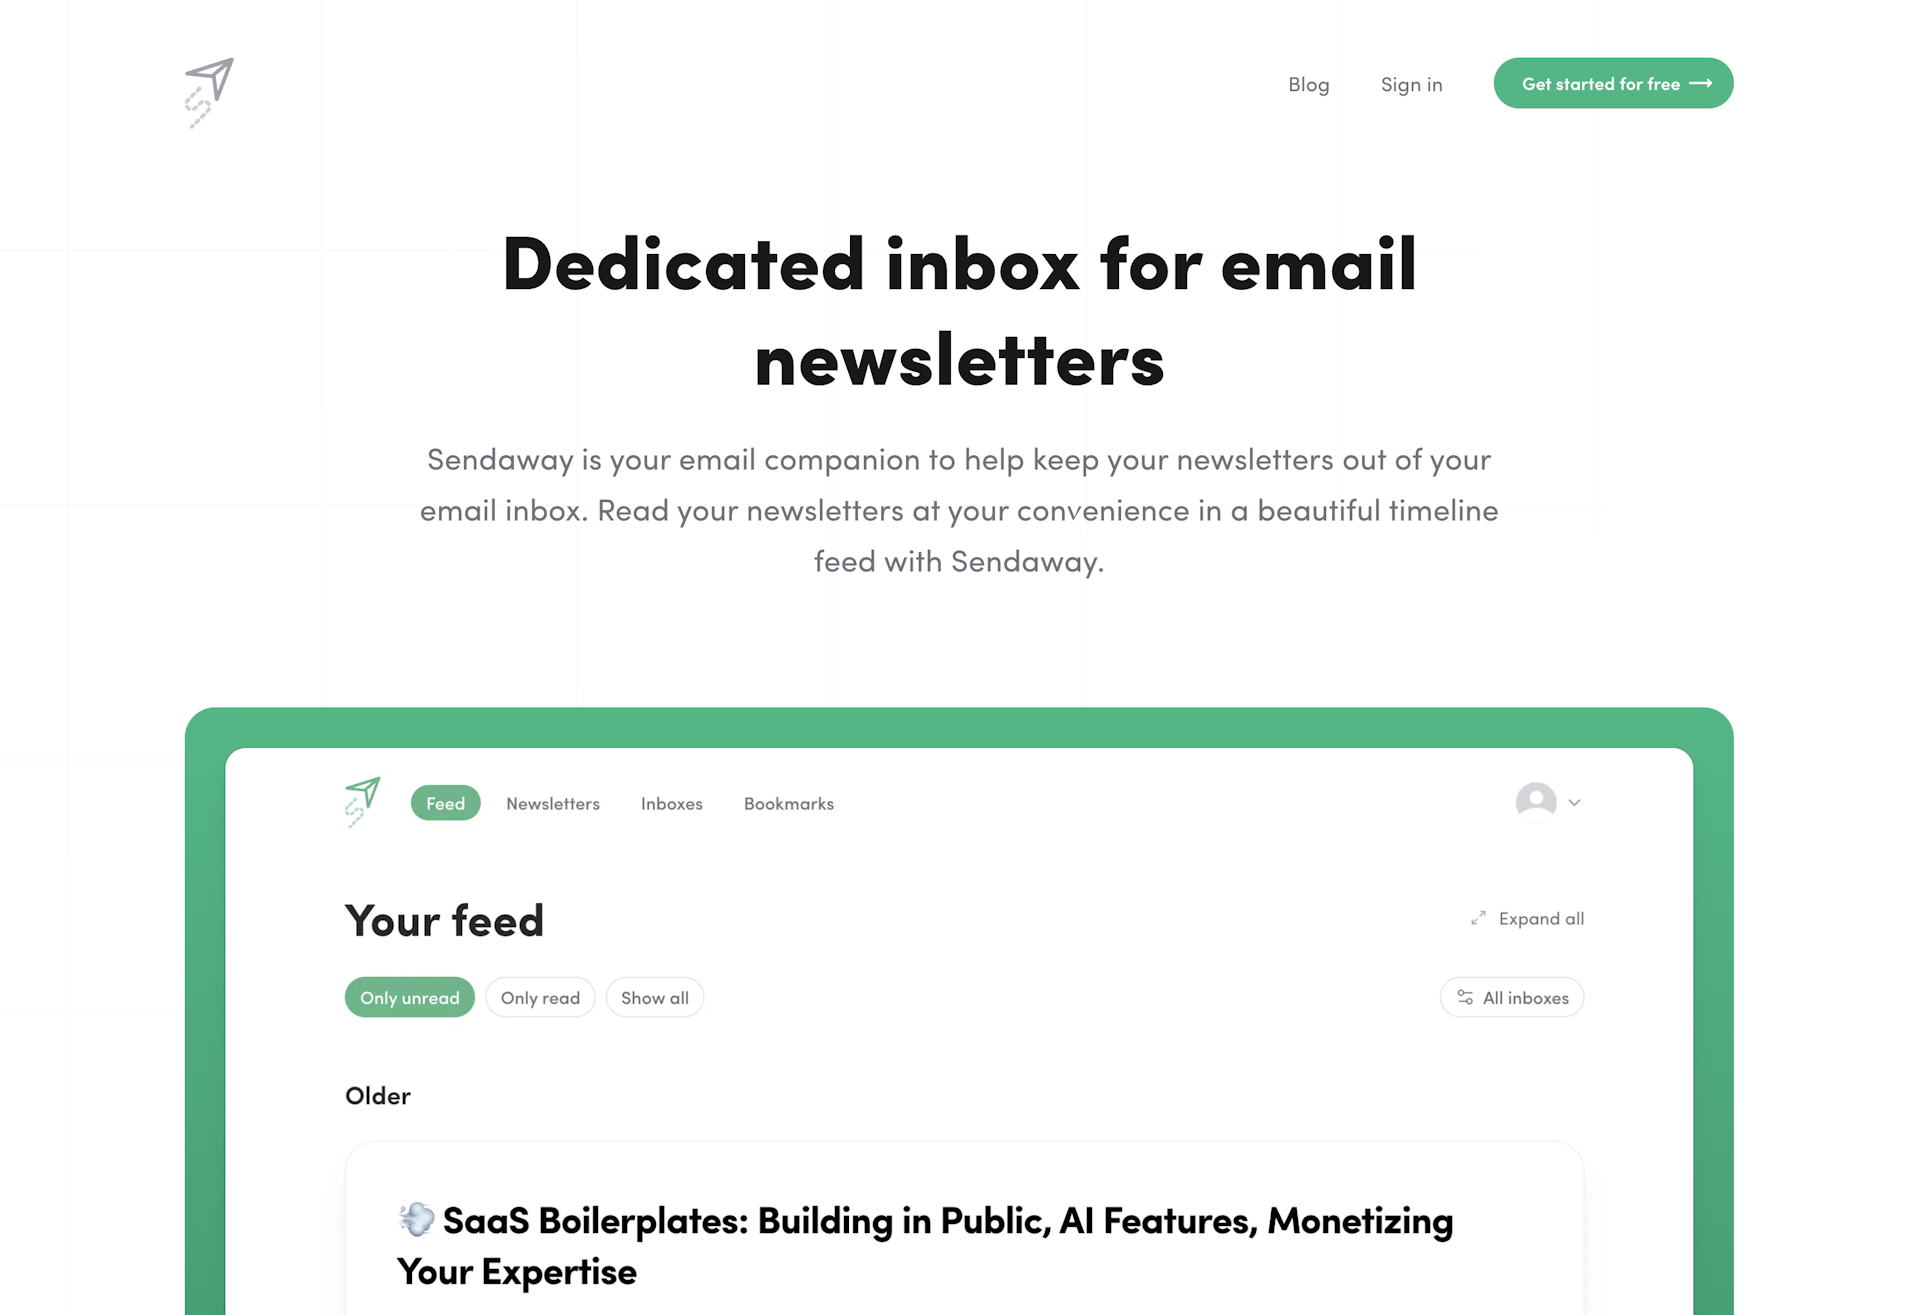 Sendaway: Give your email newsletters a new home